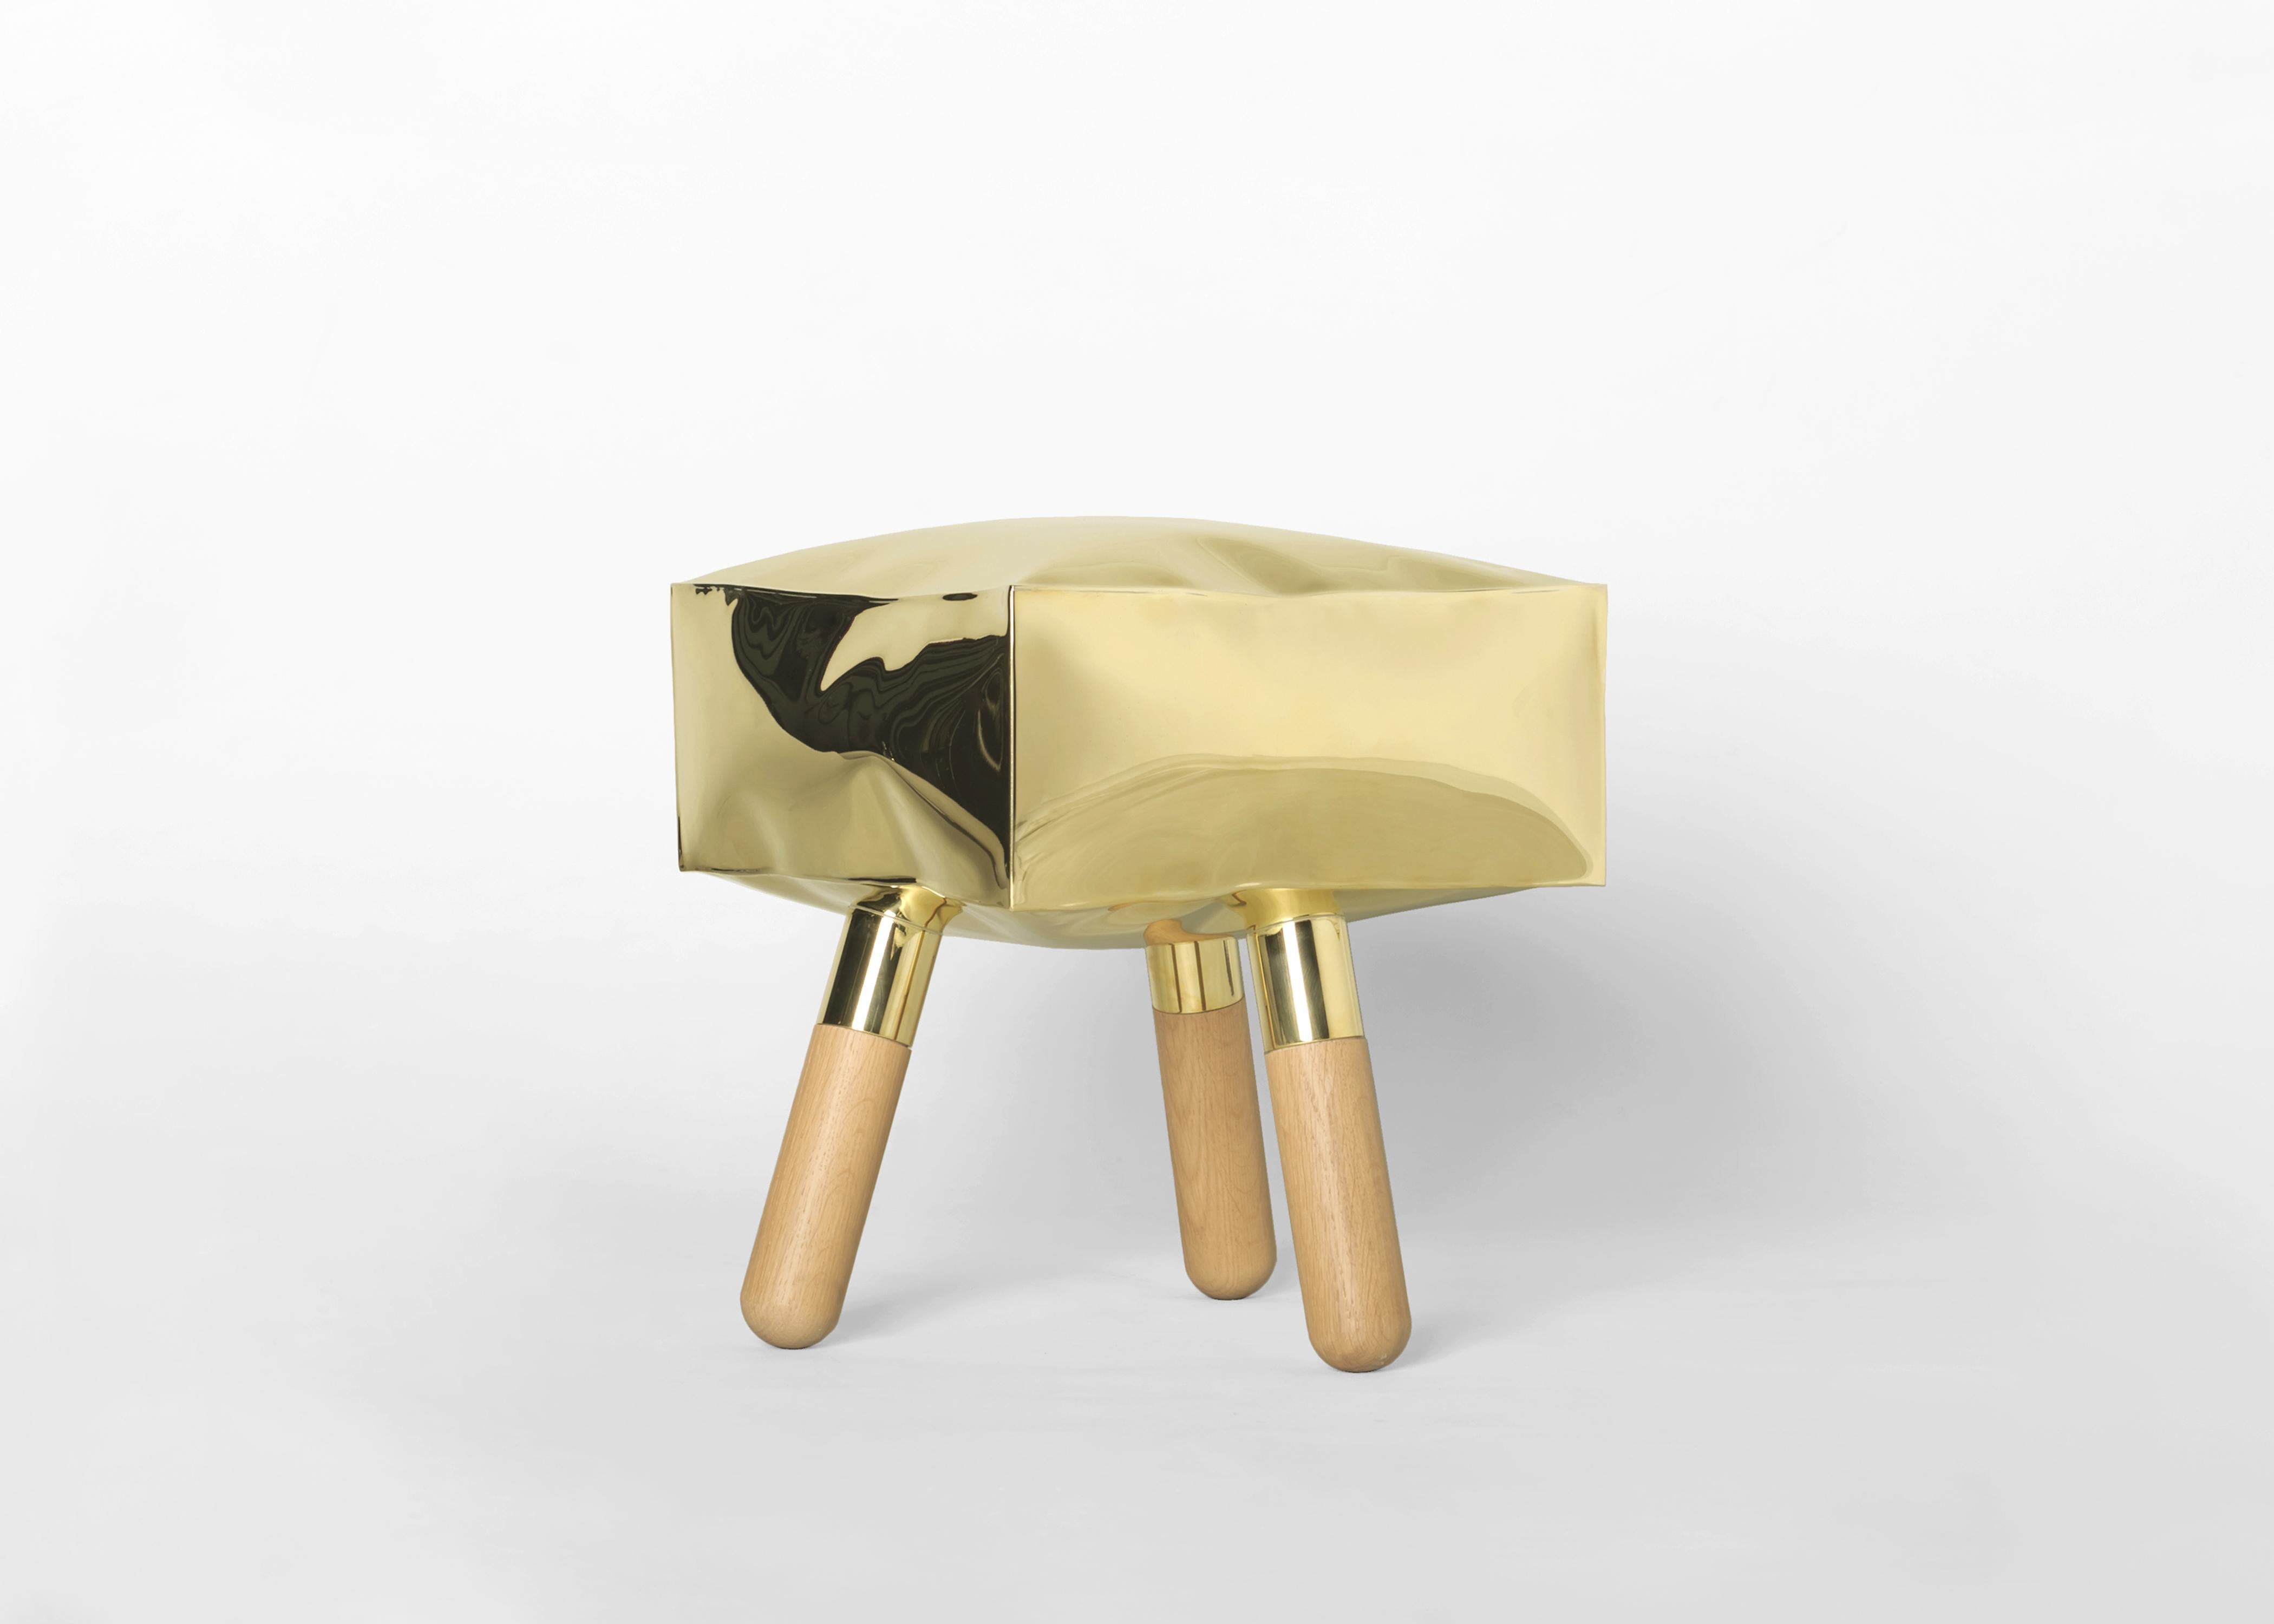 Icenine stool by Edizione Limitata
Limited Edition of 15+3 AP pieces. Signed and numbered.
Designers: Simone Fanciullacci, Antonio De Marco
Dimensions: H 41 × W 35 × L 35 cm
Materials: Polished brass, solid oakwood

Edizione Limitata, that is to say